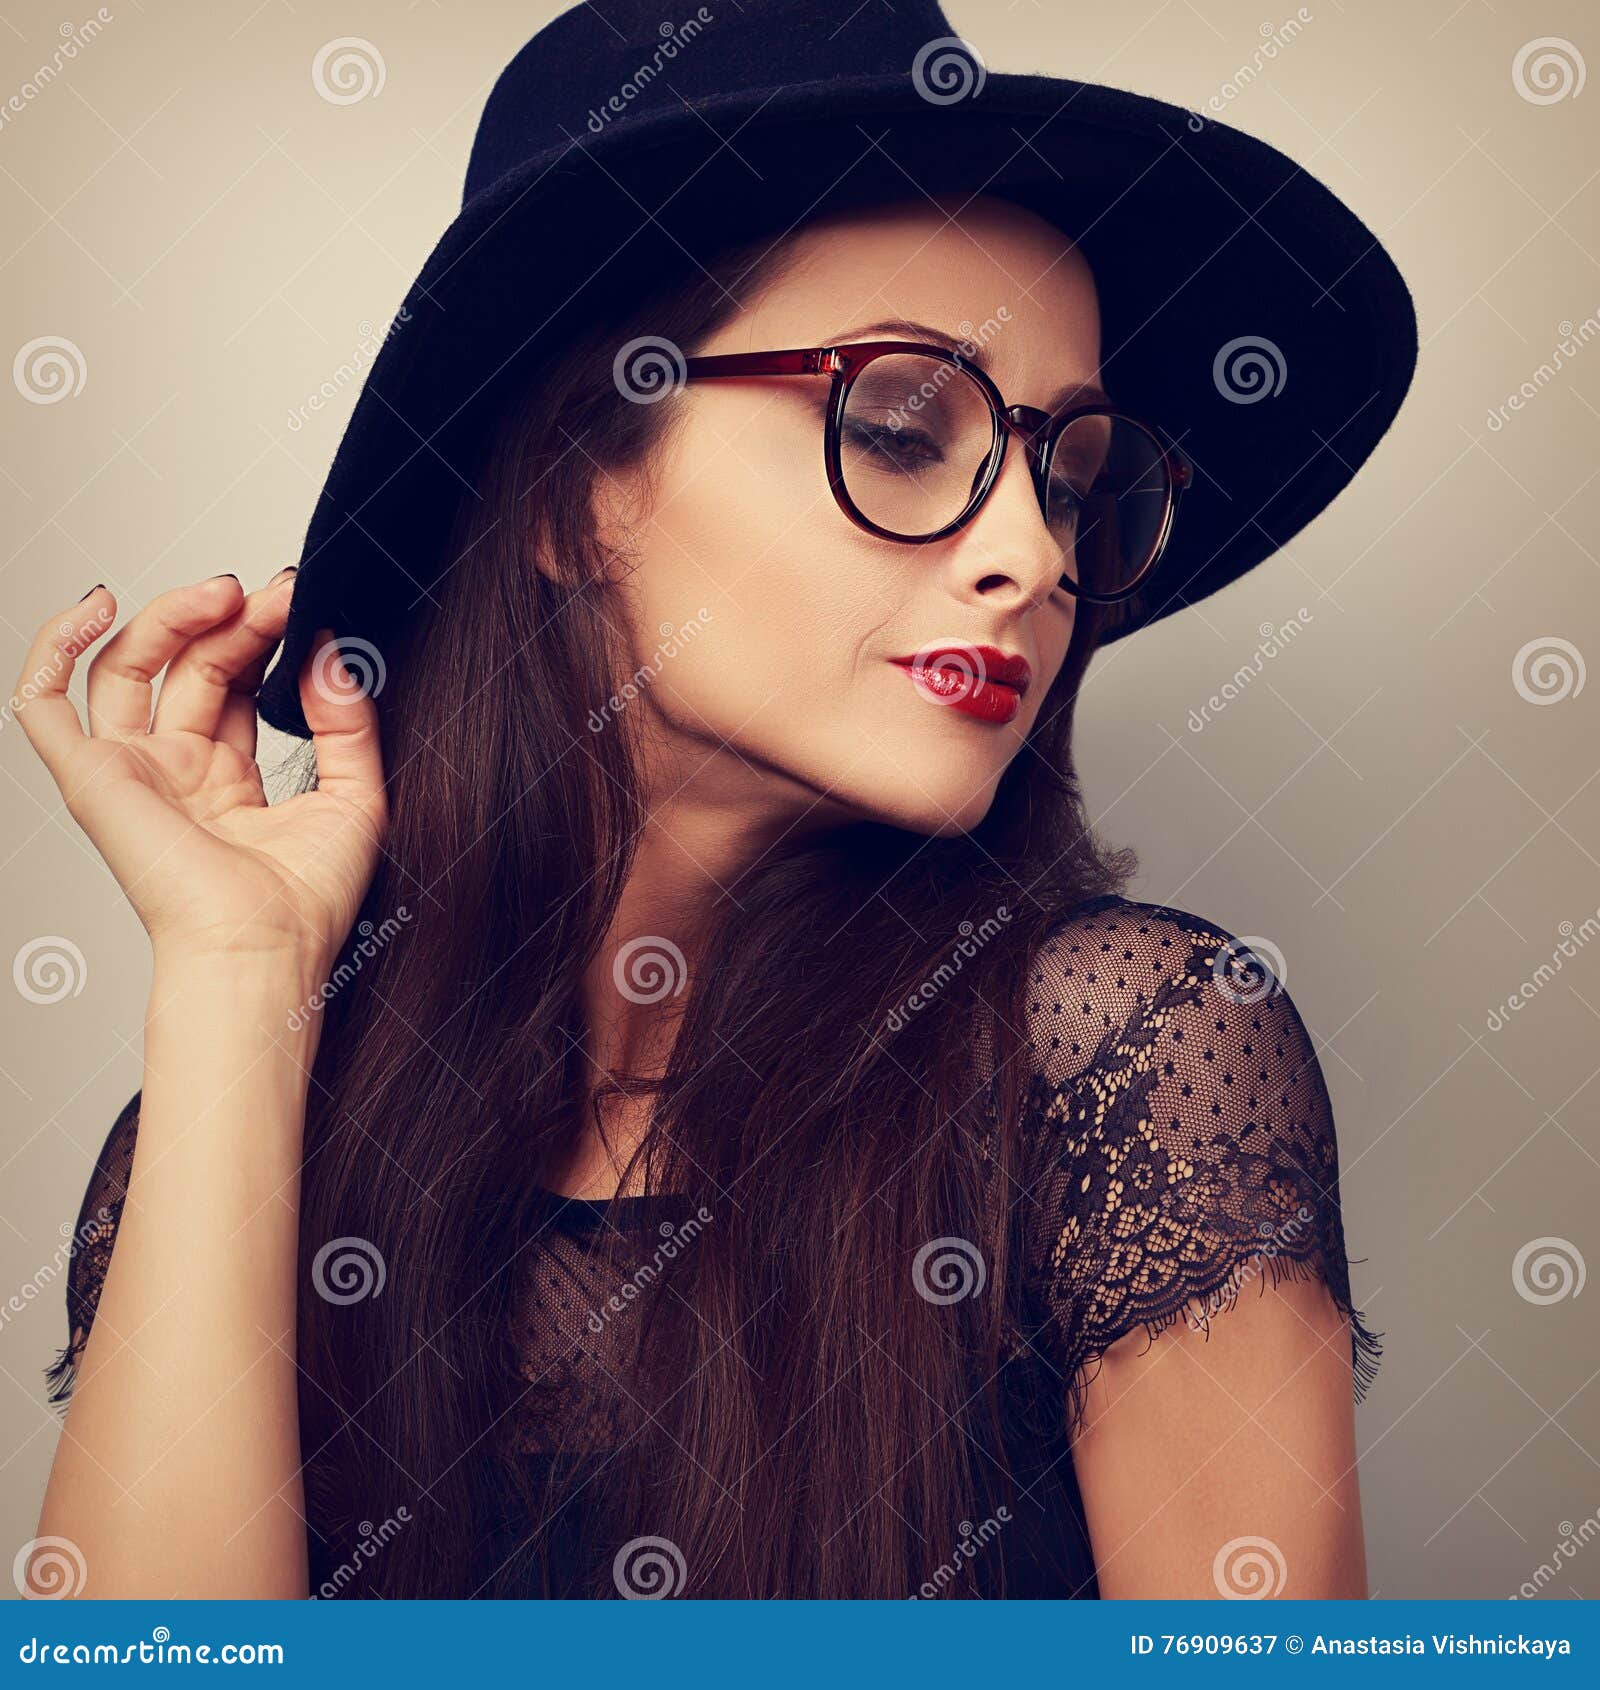 Glamour Makeup Woman Profile in Fashion Glasses and Dark Bl Stock Image ...